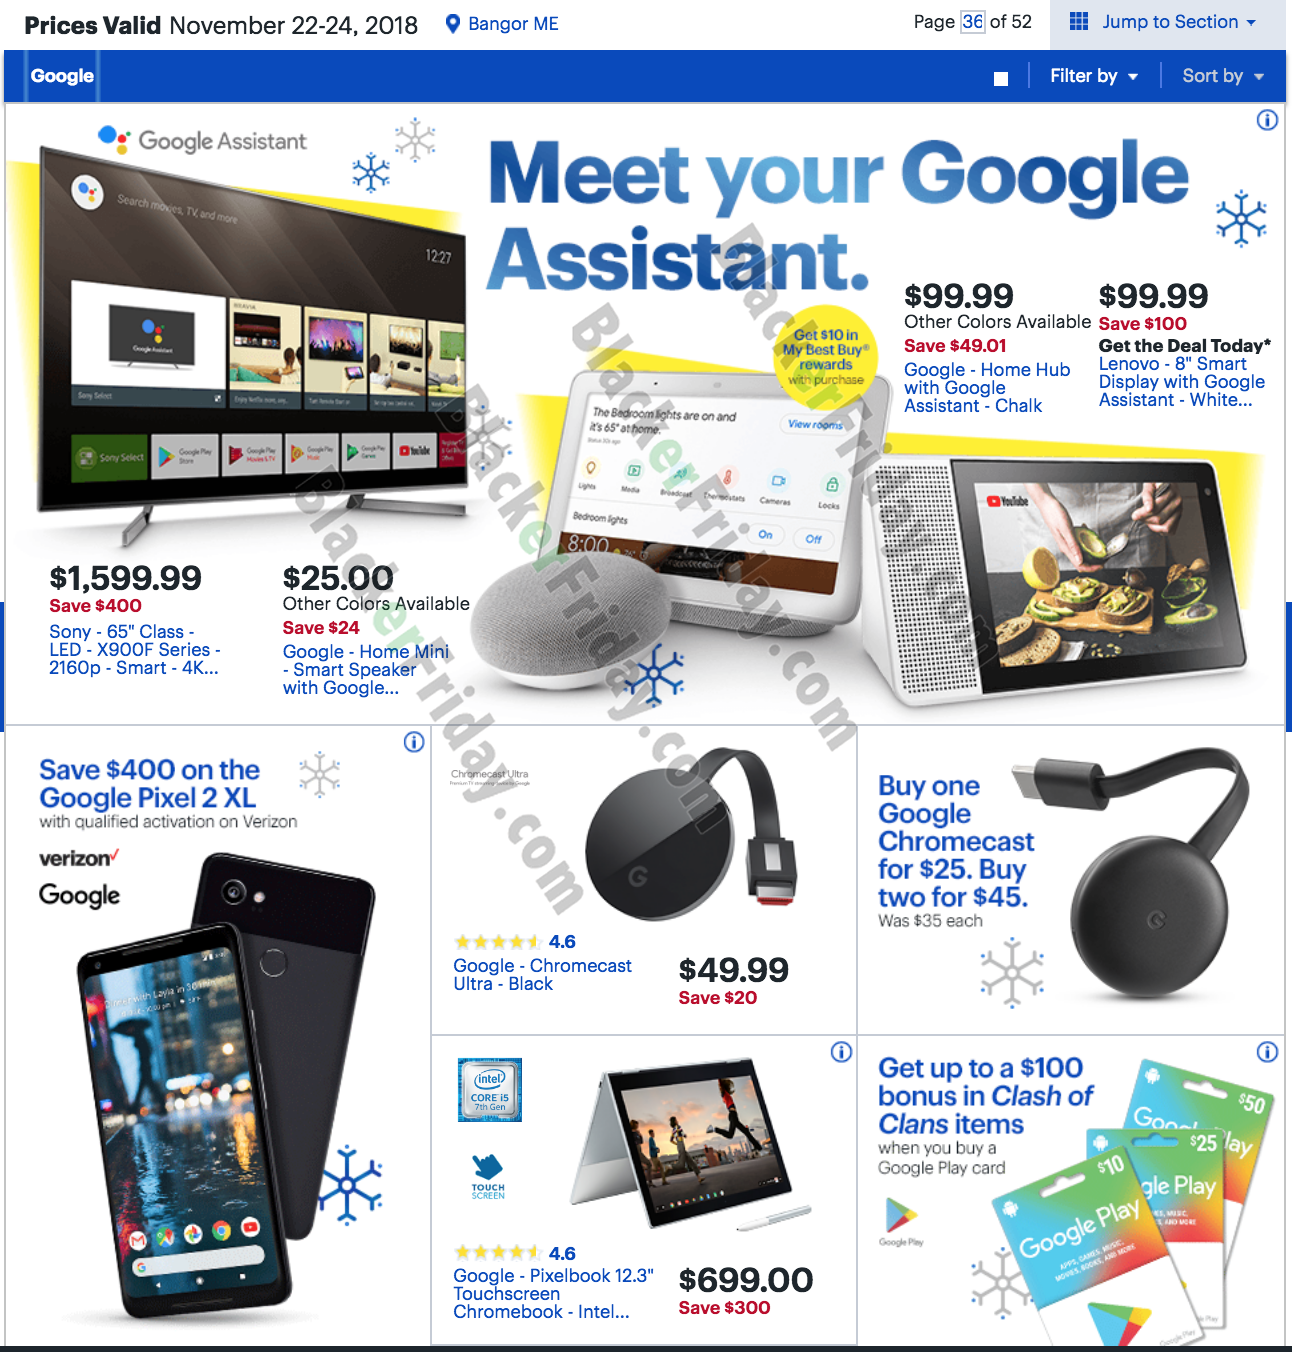 Best Buy&#39;s Black Friday 2019 Ad is Released! See What&#39;s on Sale - Blacker Friday